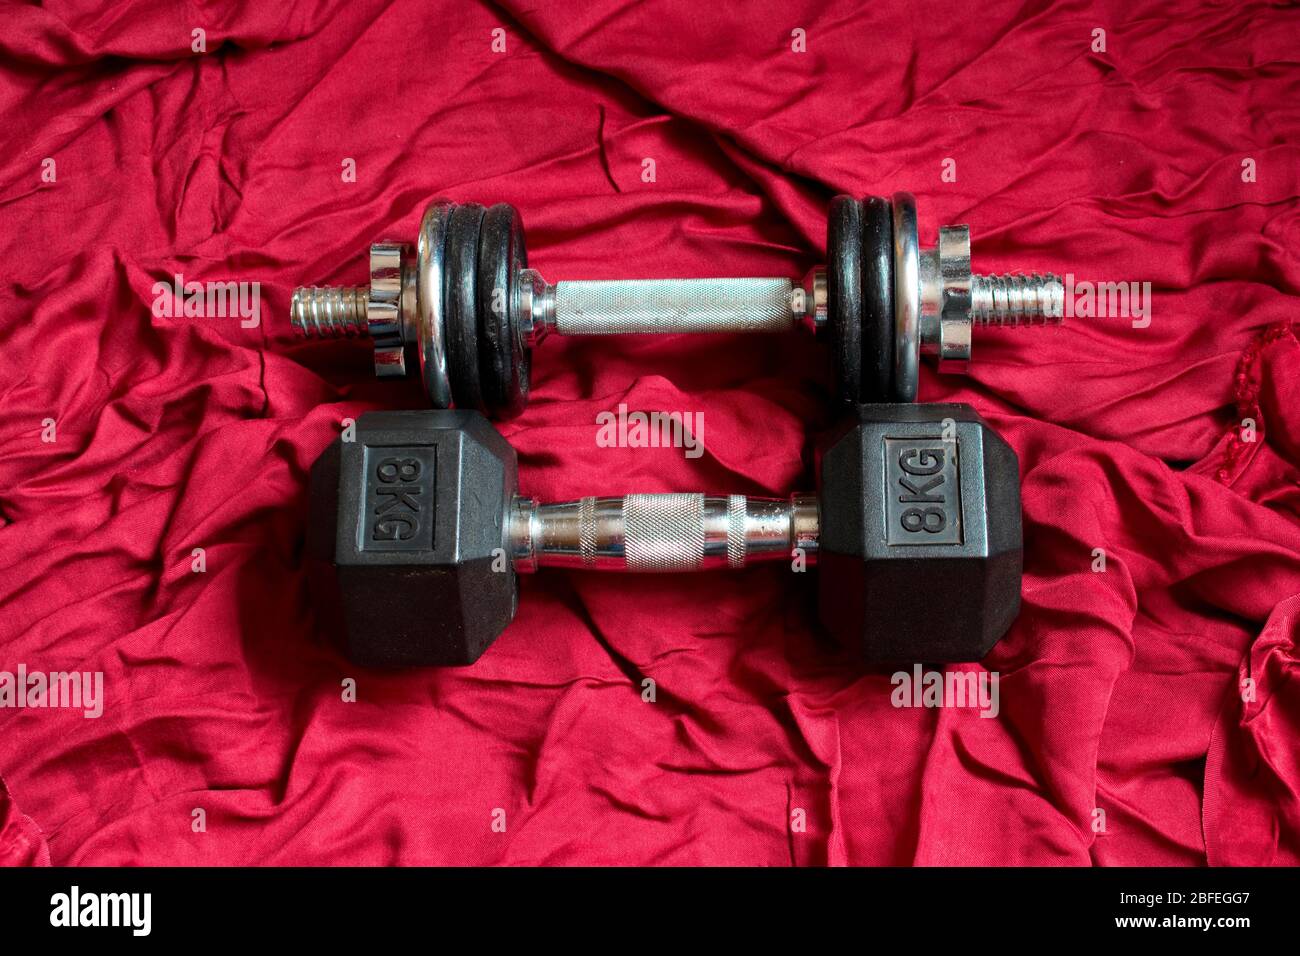 Two dumbbells are lying on red satin, ready for working out. Stock Photo